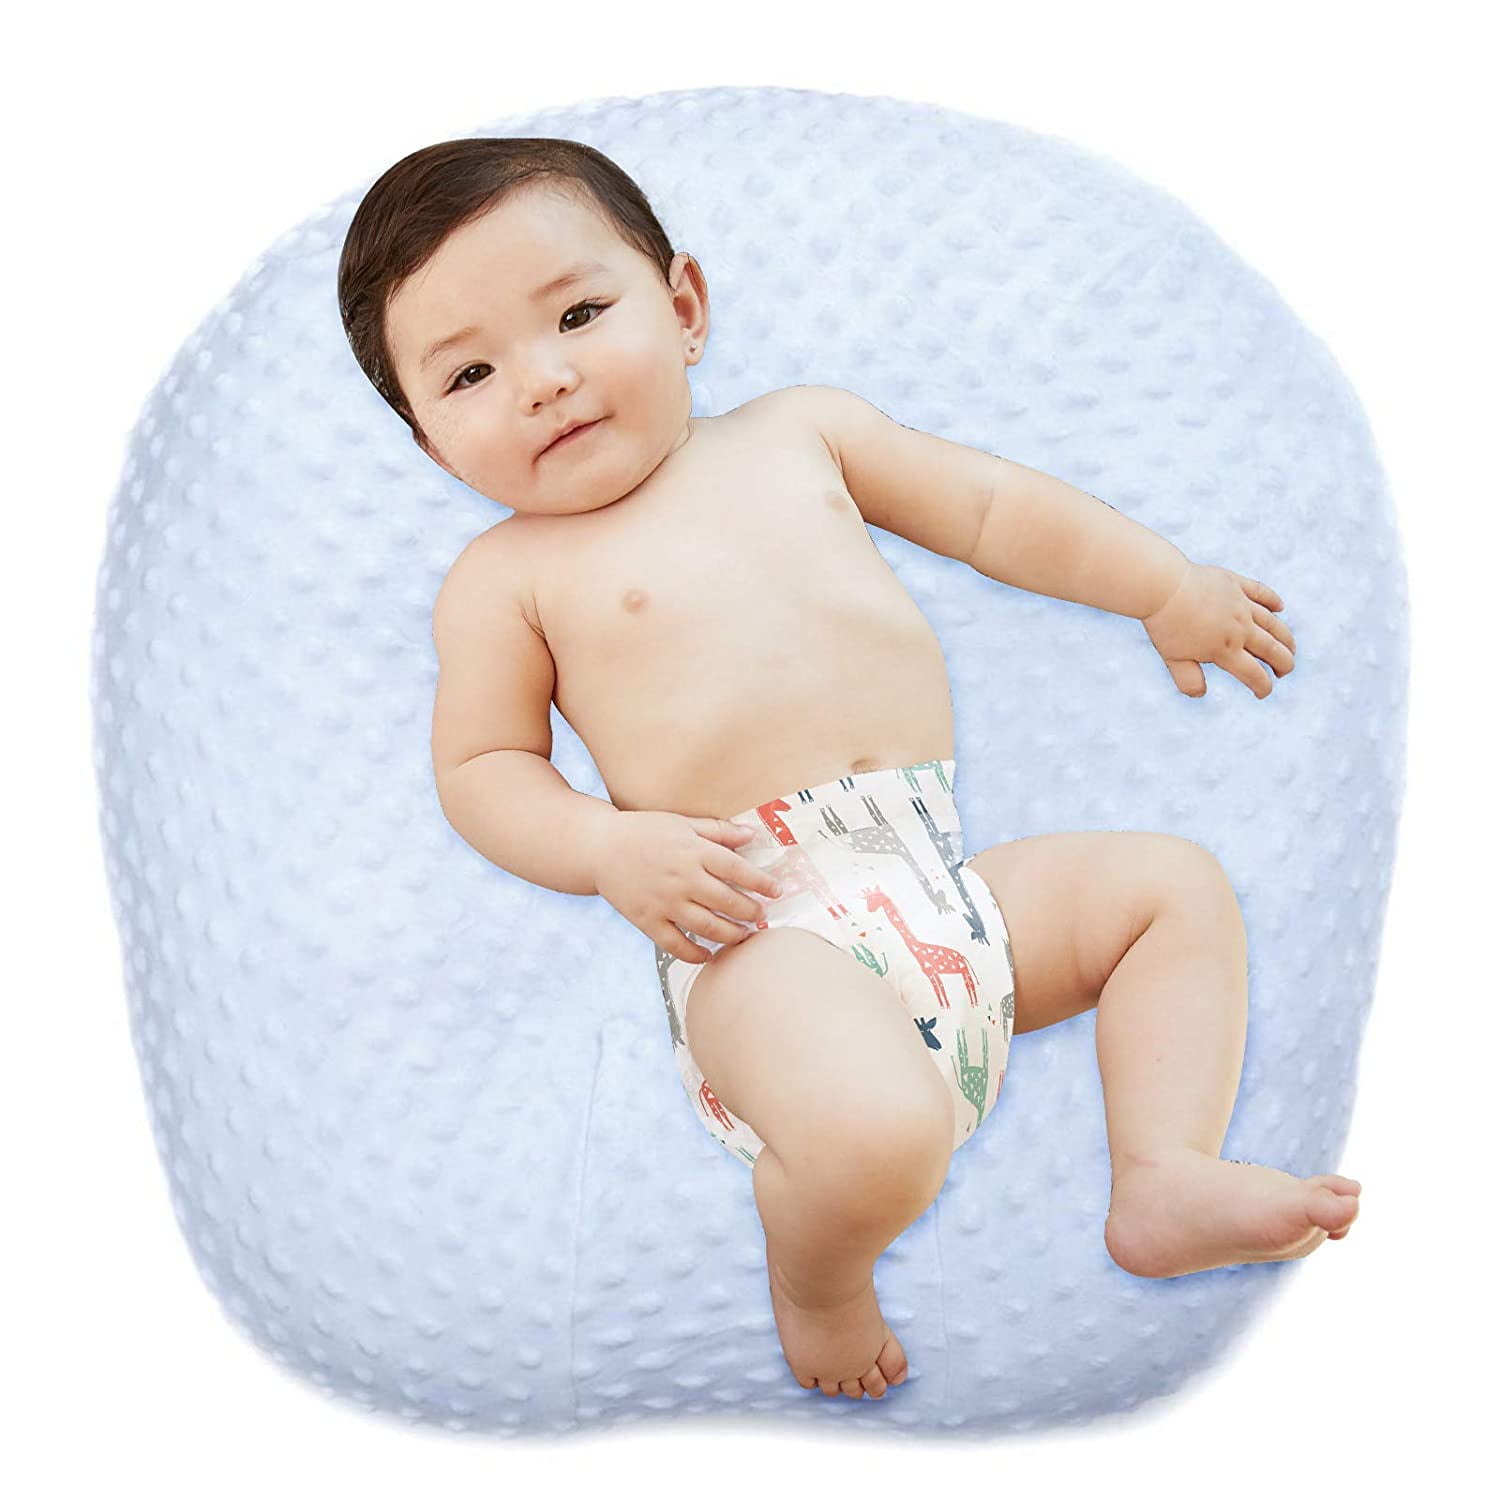 Super Soft Premium Minky Dot Water Resistant Baby Lounger Cover Removable Slipcover for Newborn Lounger Safe for Babies White Ultra Comfortable 